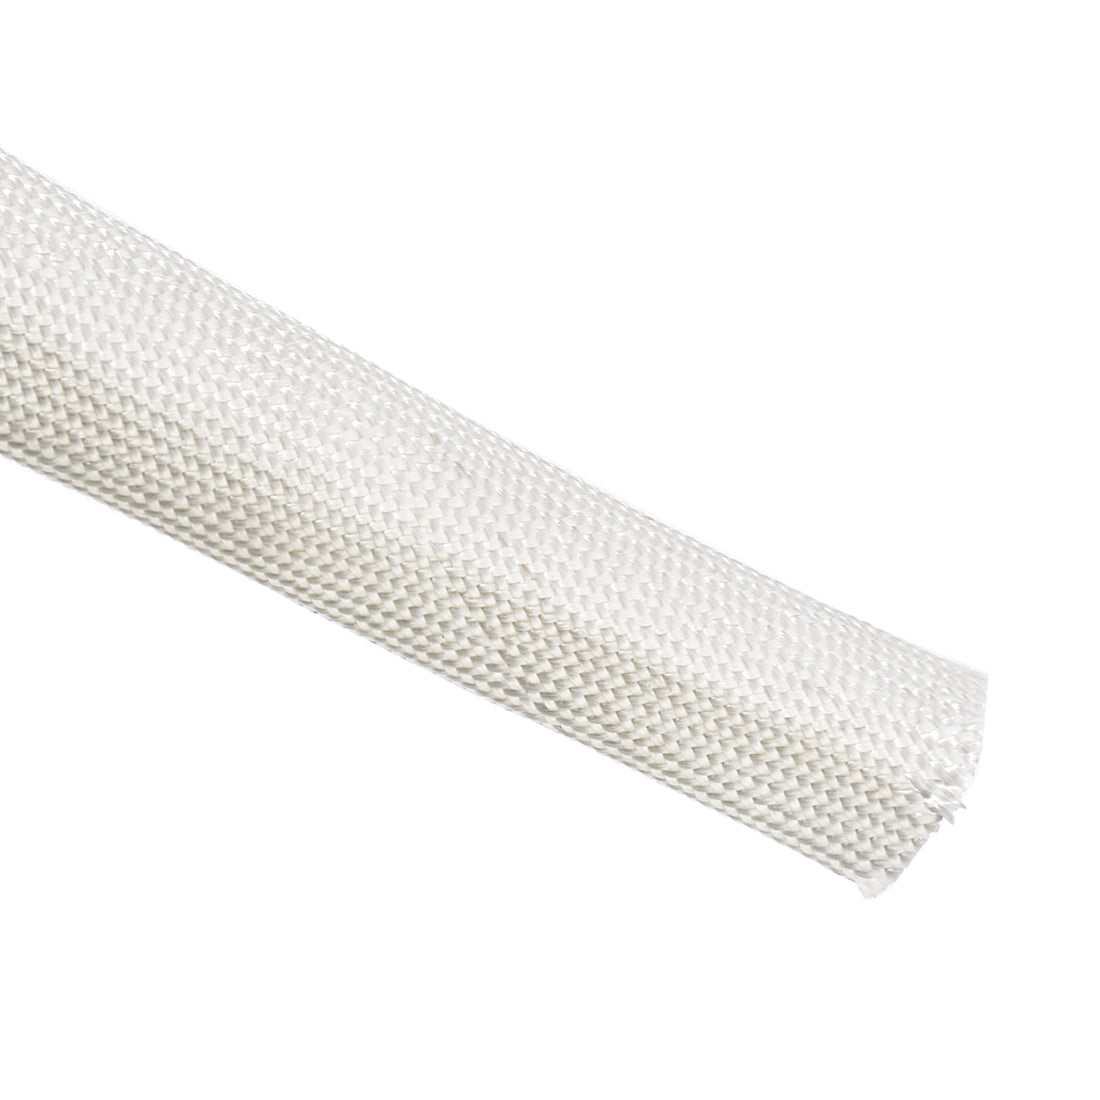 uxcell Uxcell Insulation Cable Protector, 16.4Ft-16mm High TEMP Fiberglass Sleeve White